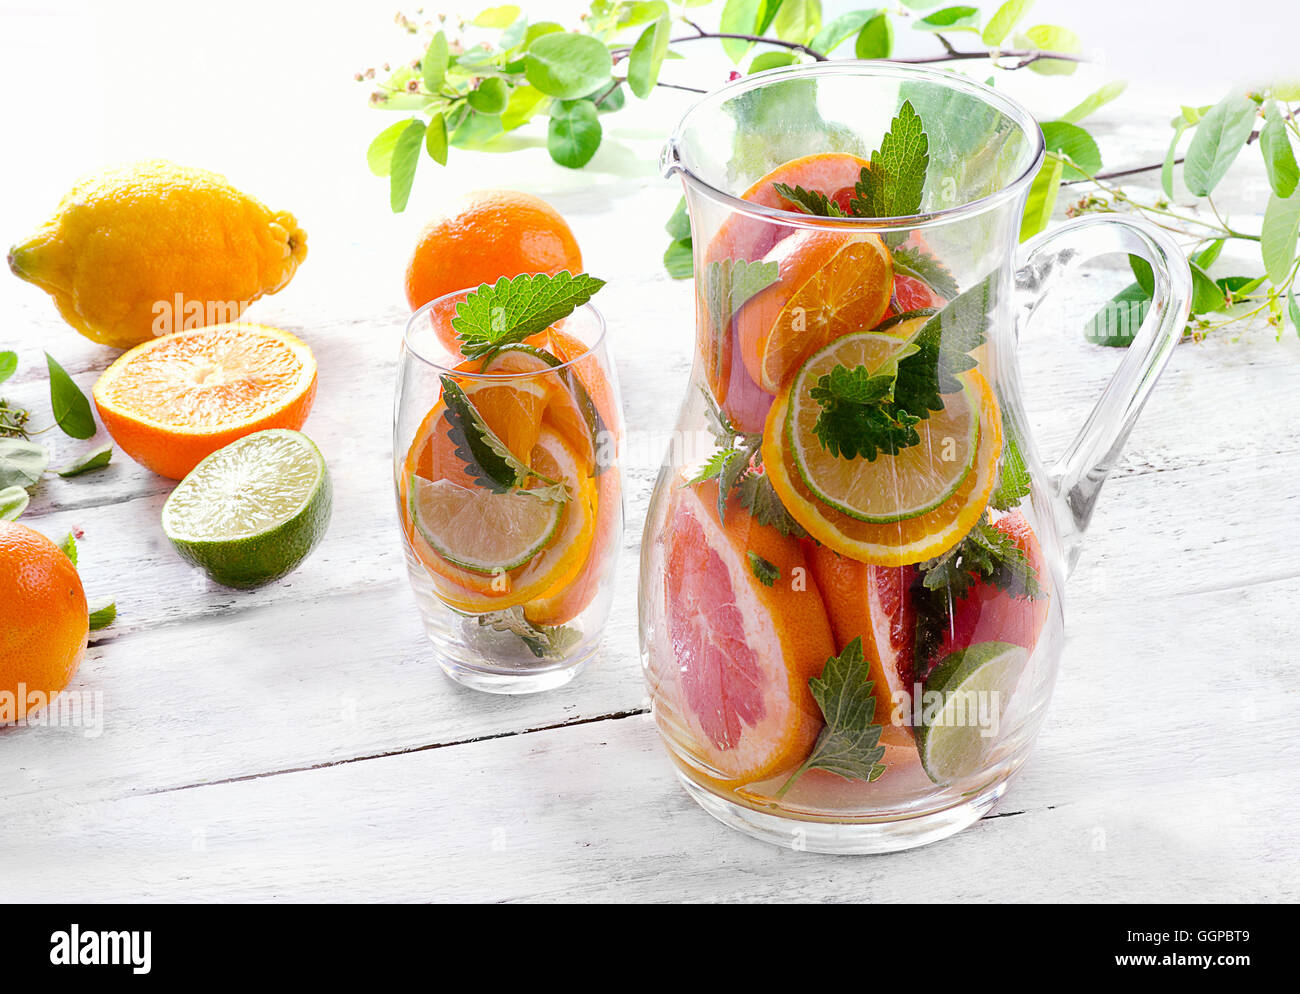 Pitcher and glass with citrus fruits and mint. Stock Photo